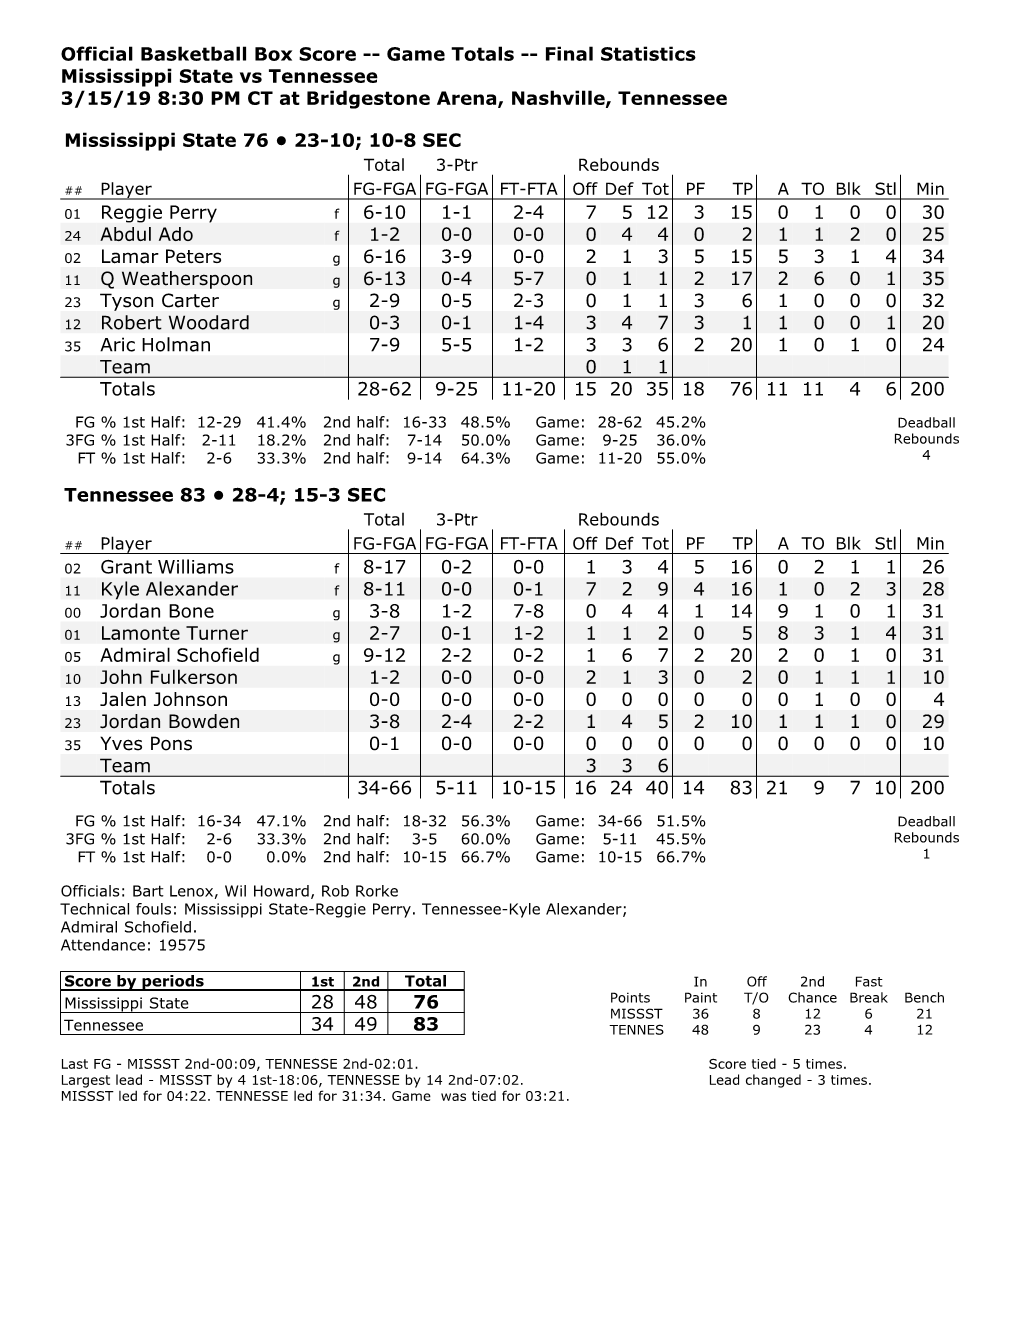 Official Basketball Box Score -- Game Totals -- Final Statistics Mississippi State Vs Tennessee 3/15/19 8:30 PM CT at Bridgestone Arena, Nashville, Tennessee